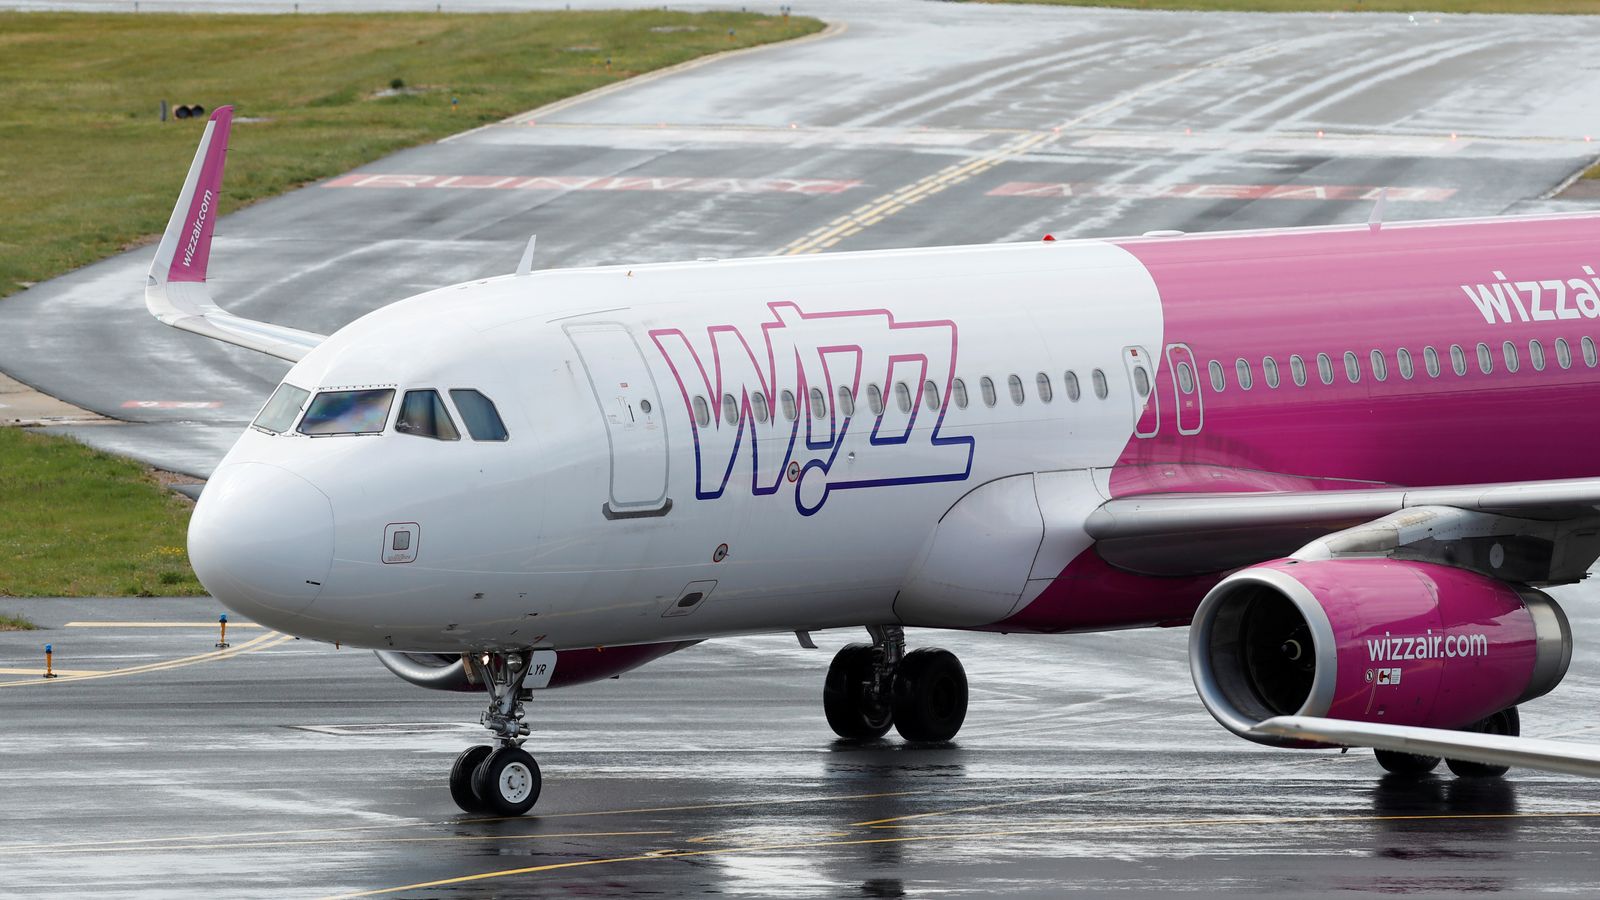 Pilot union fury as Wizz Air boss urges fatigued staff to go 'the extra mile'